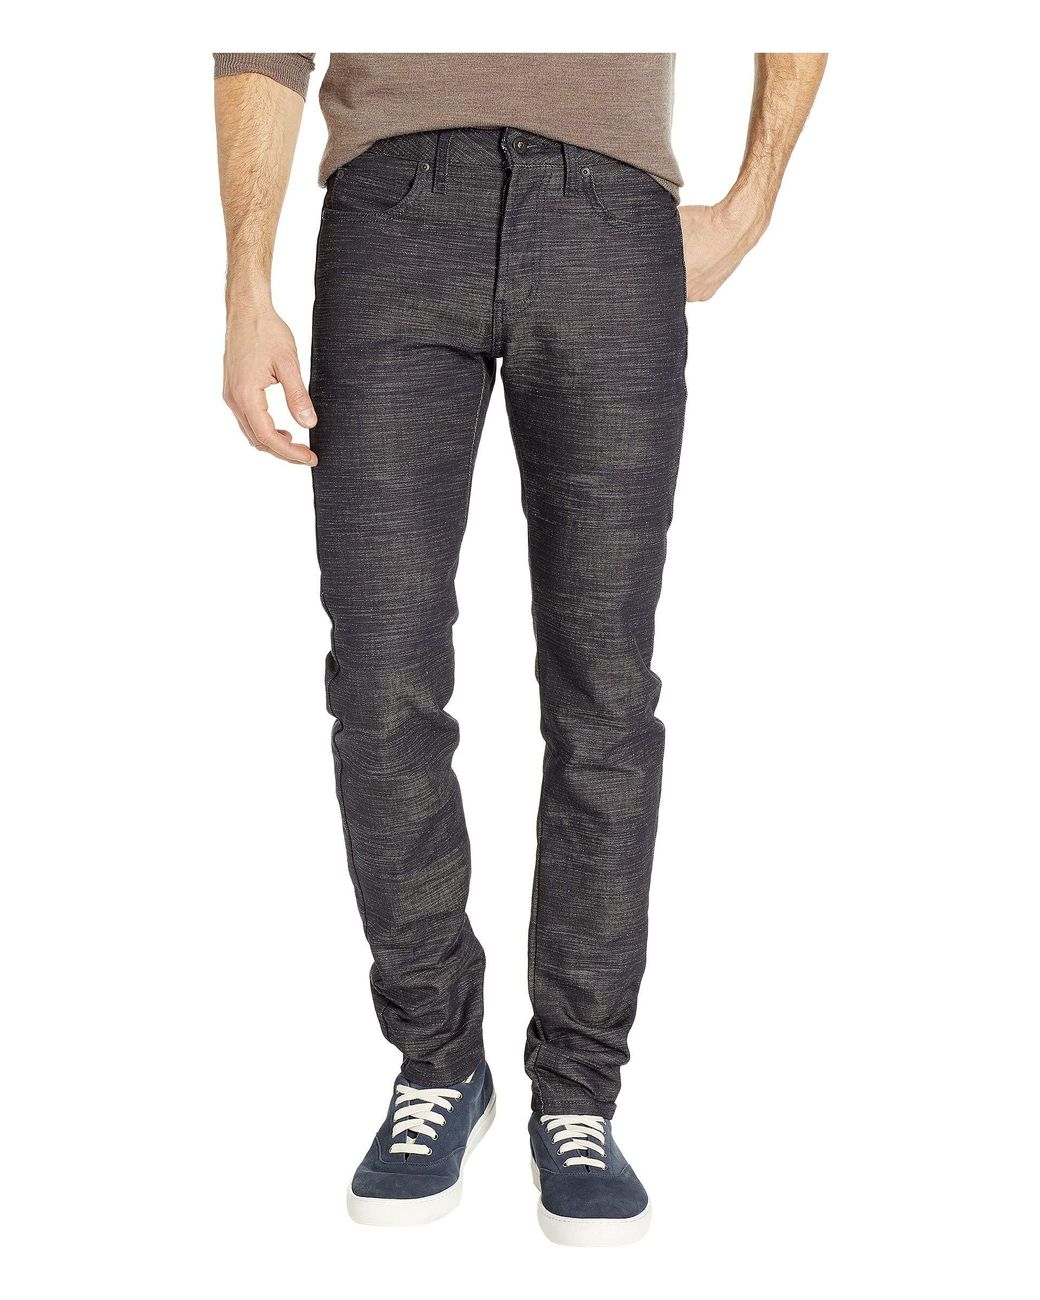 Naked & Famous Skinny Guy Jeans in Grey (Gray) for Men - Lyst